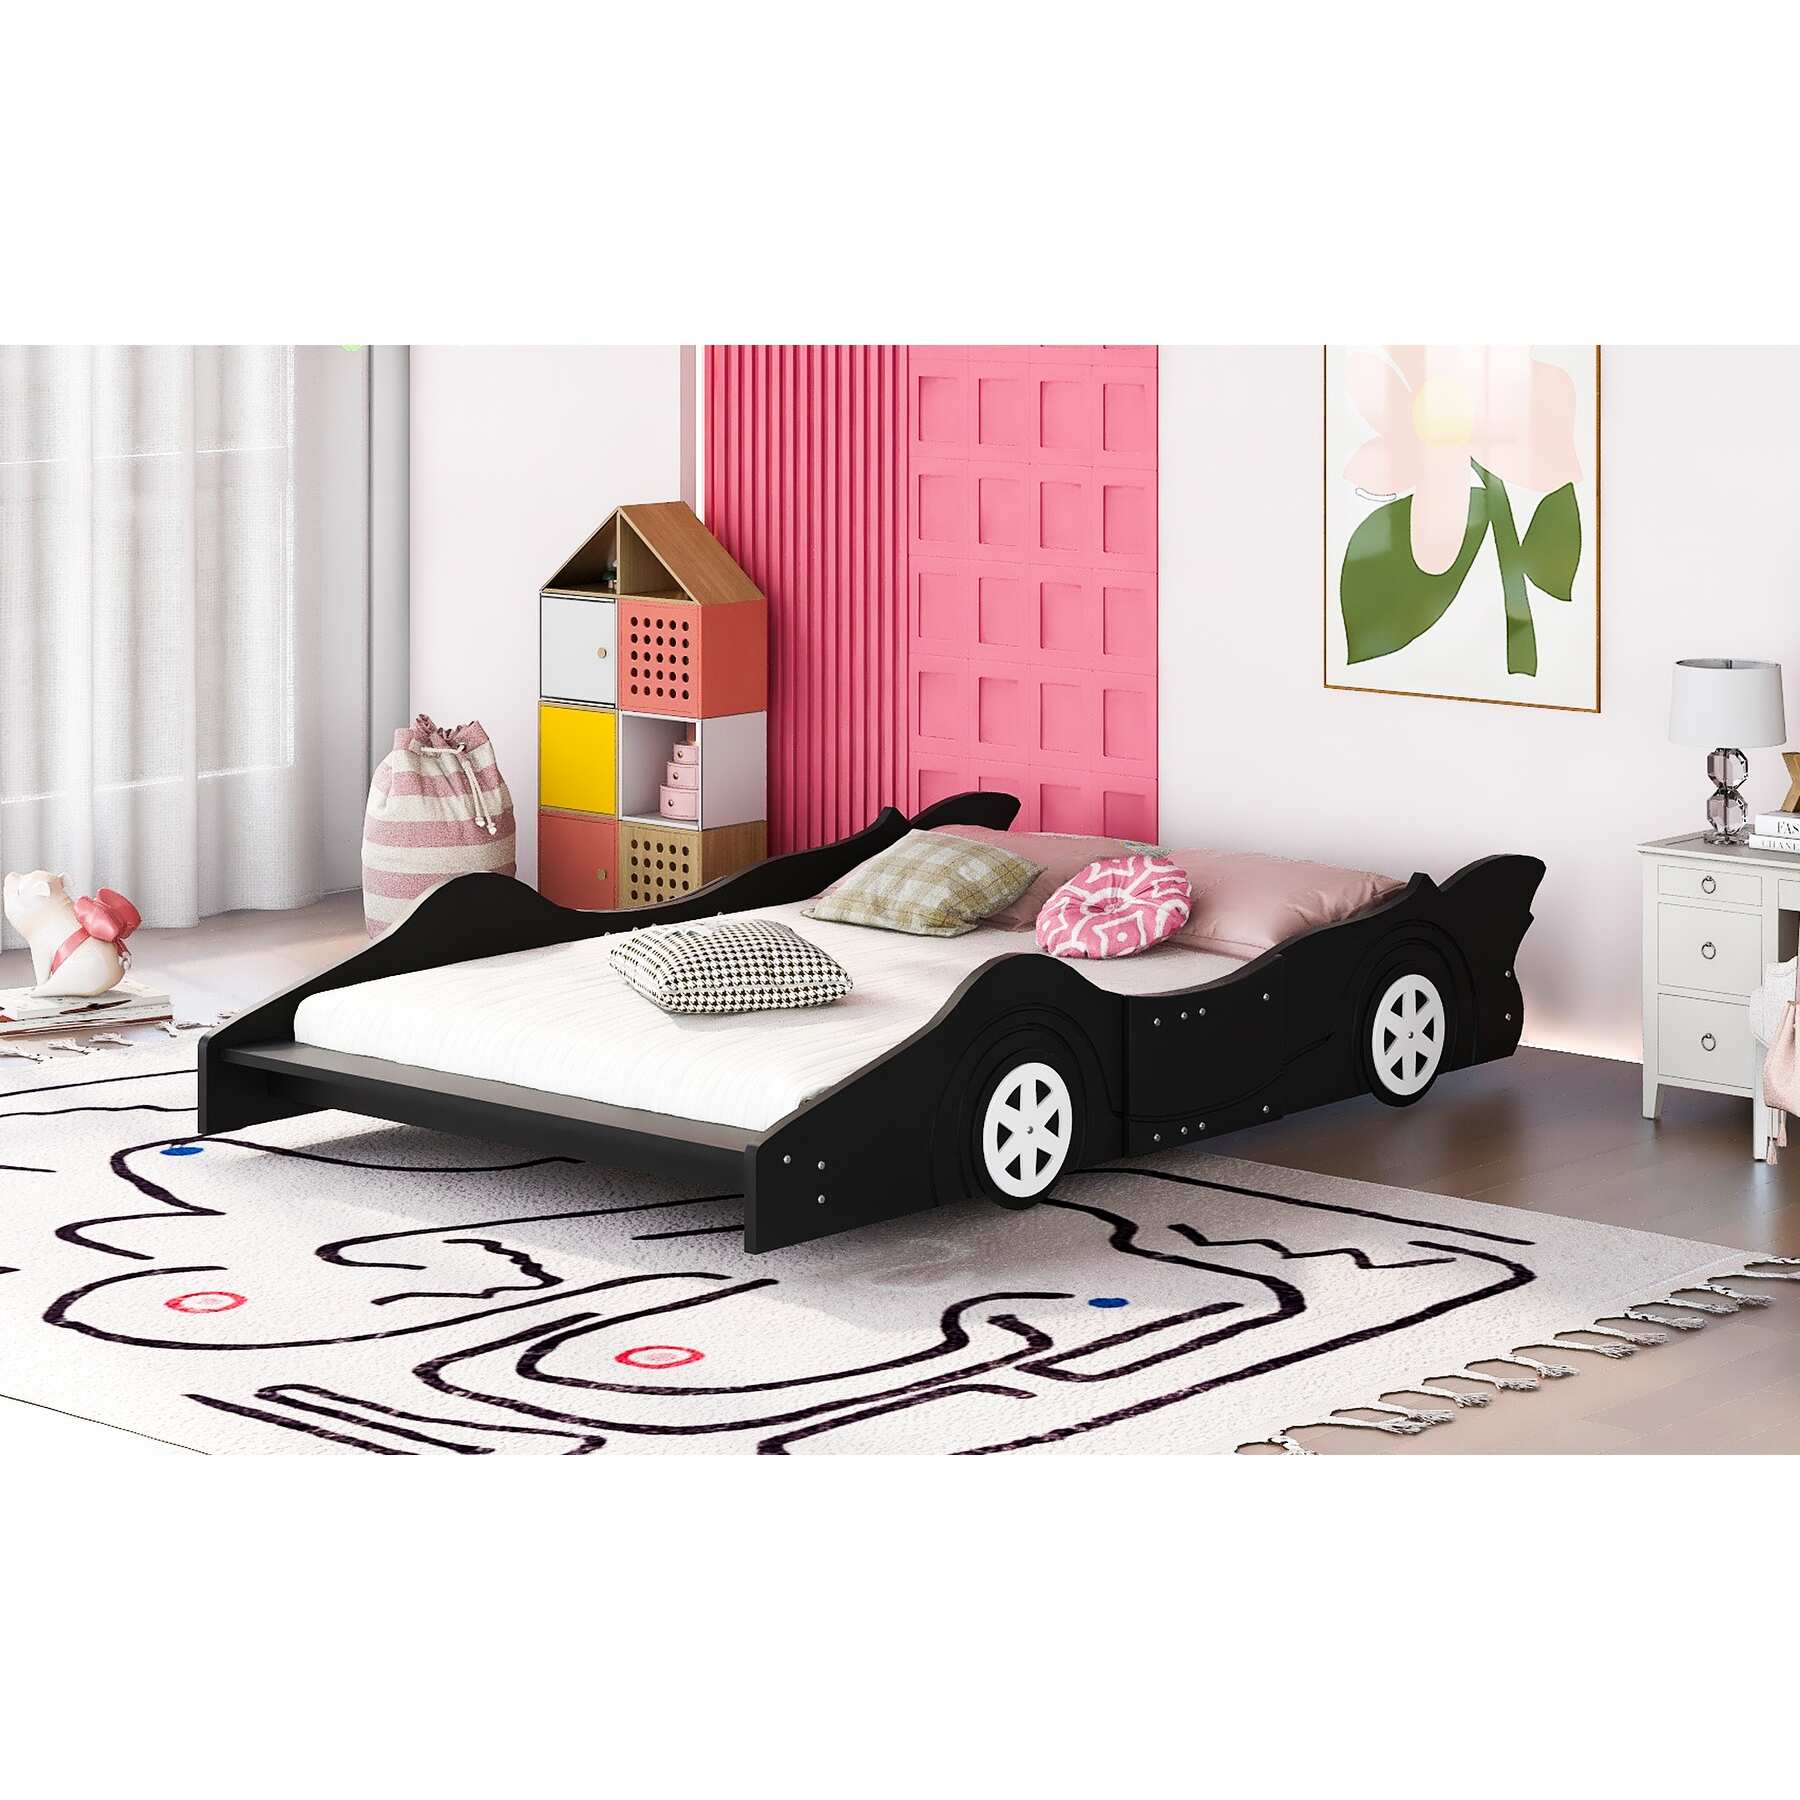 Full Size Race Car Bed with Four Wheels, Wood Platform Bed with Support Slats and Guardrails, Fun Bed Frame - Black